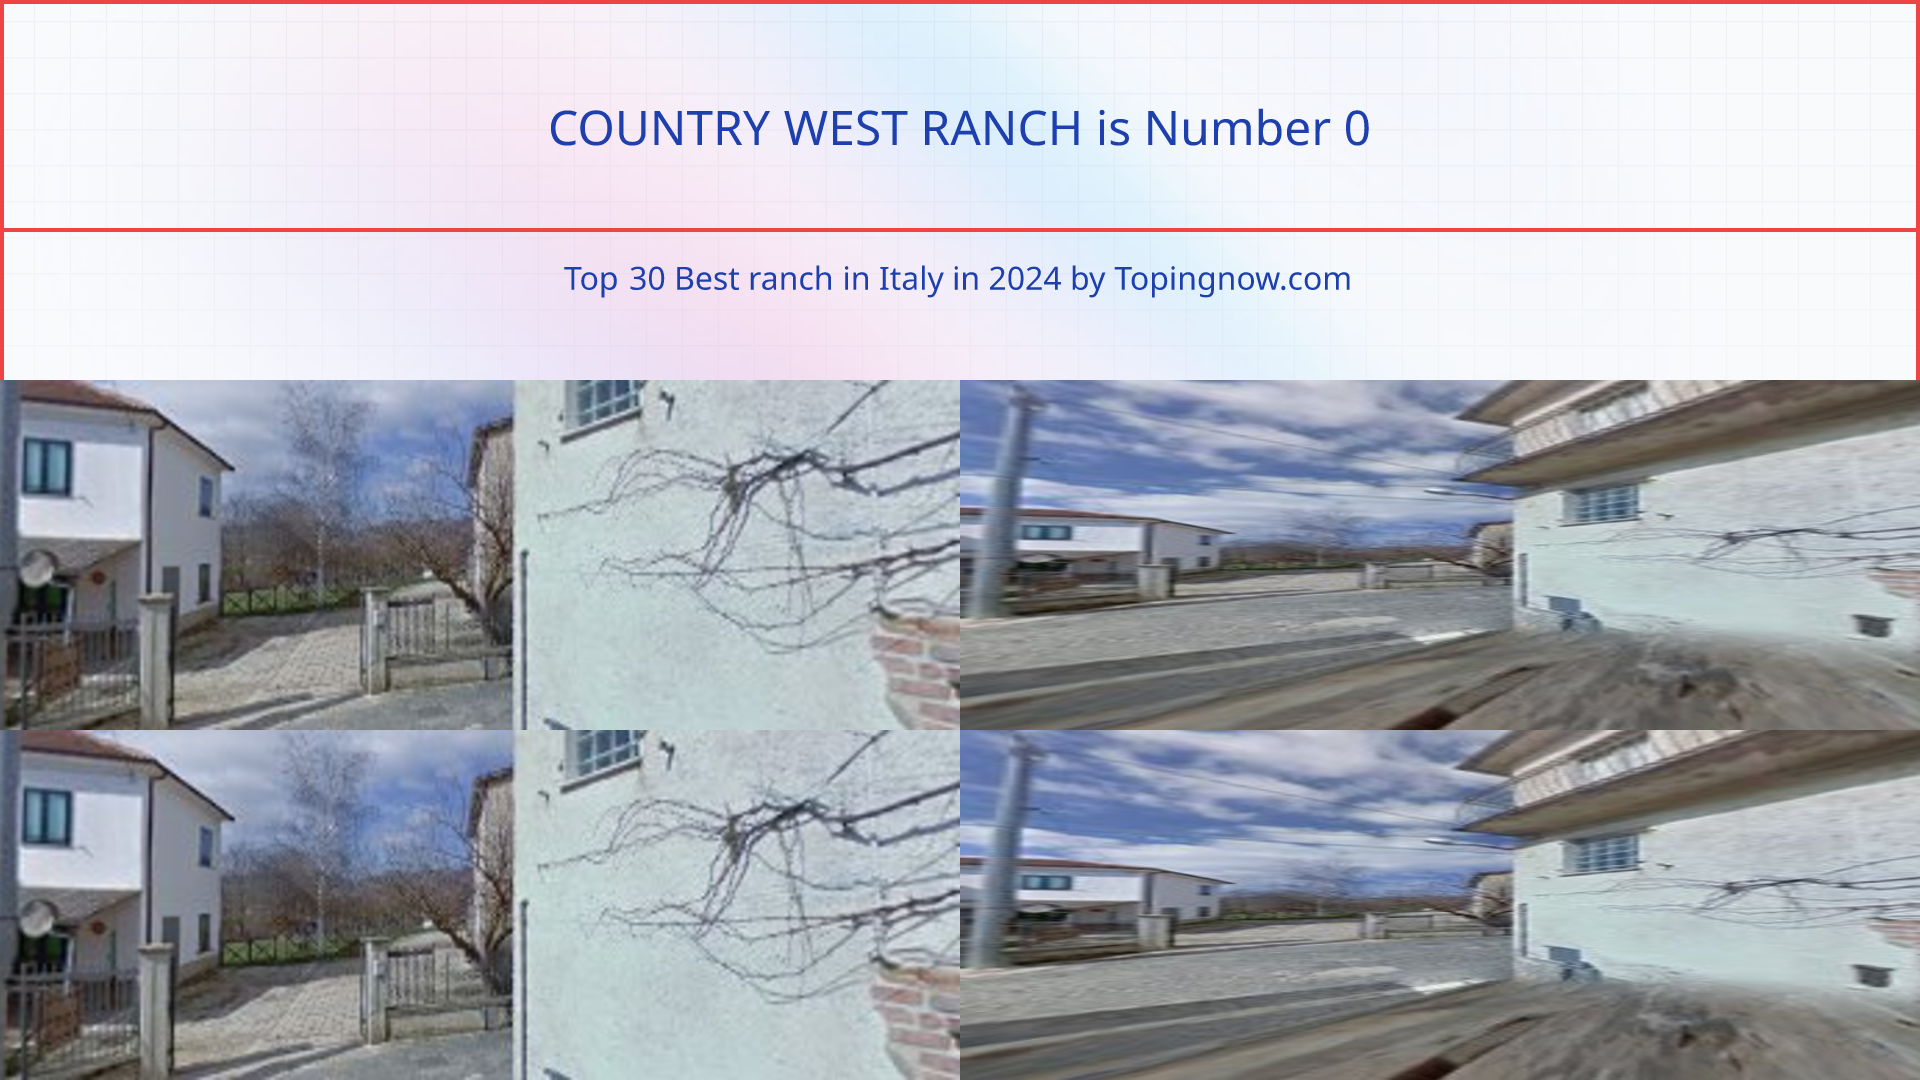 COUNTRY WEST RANCH: Top 30 Best ranch in Italy in 2024